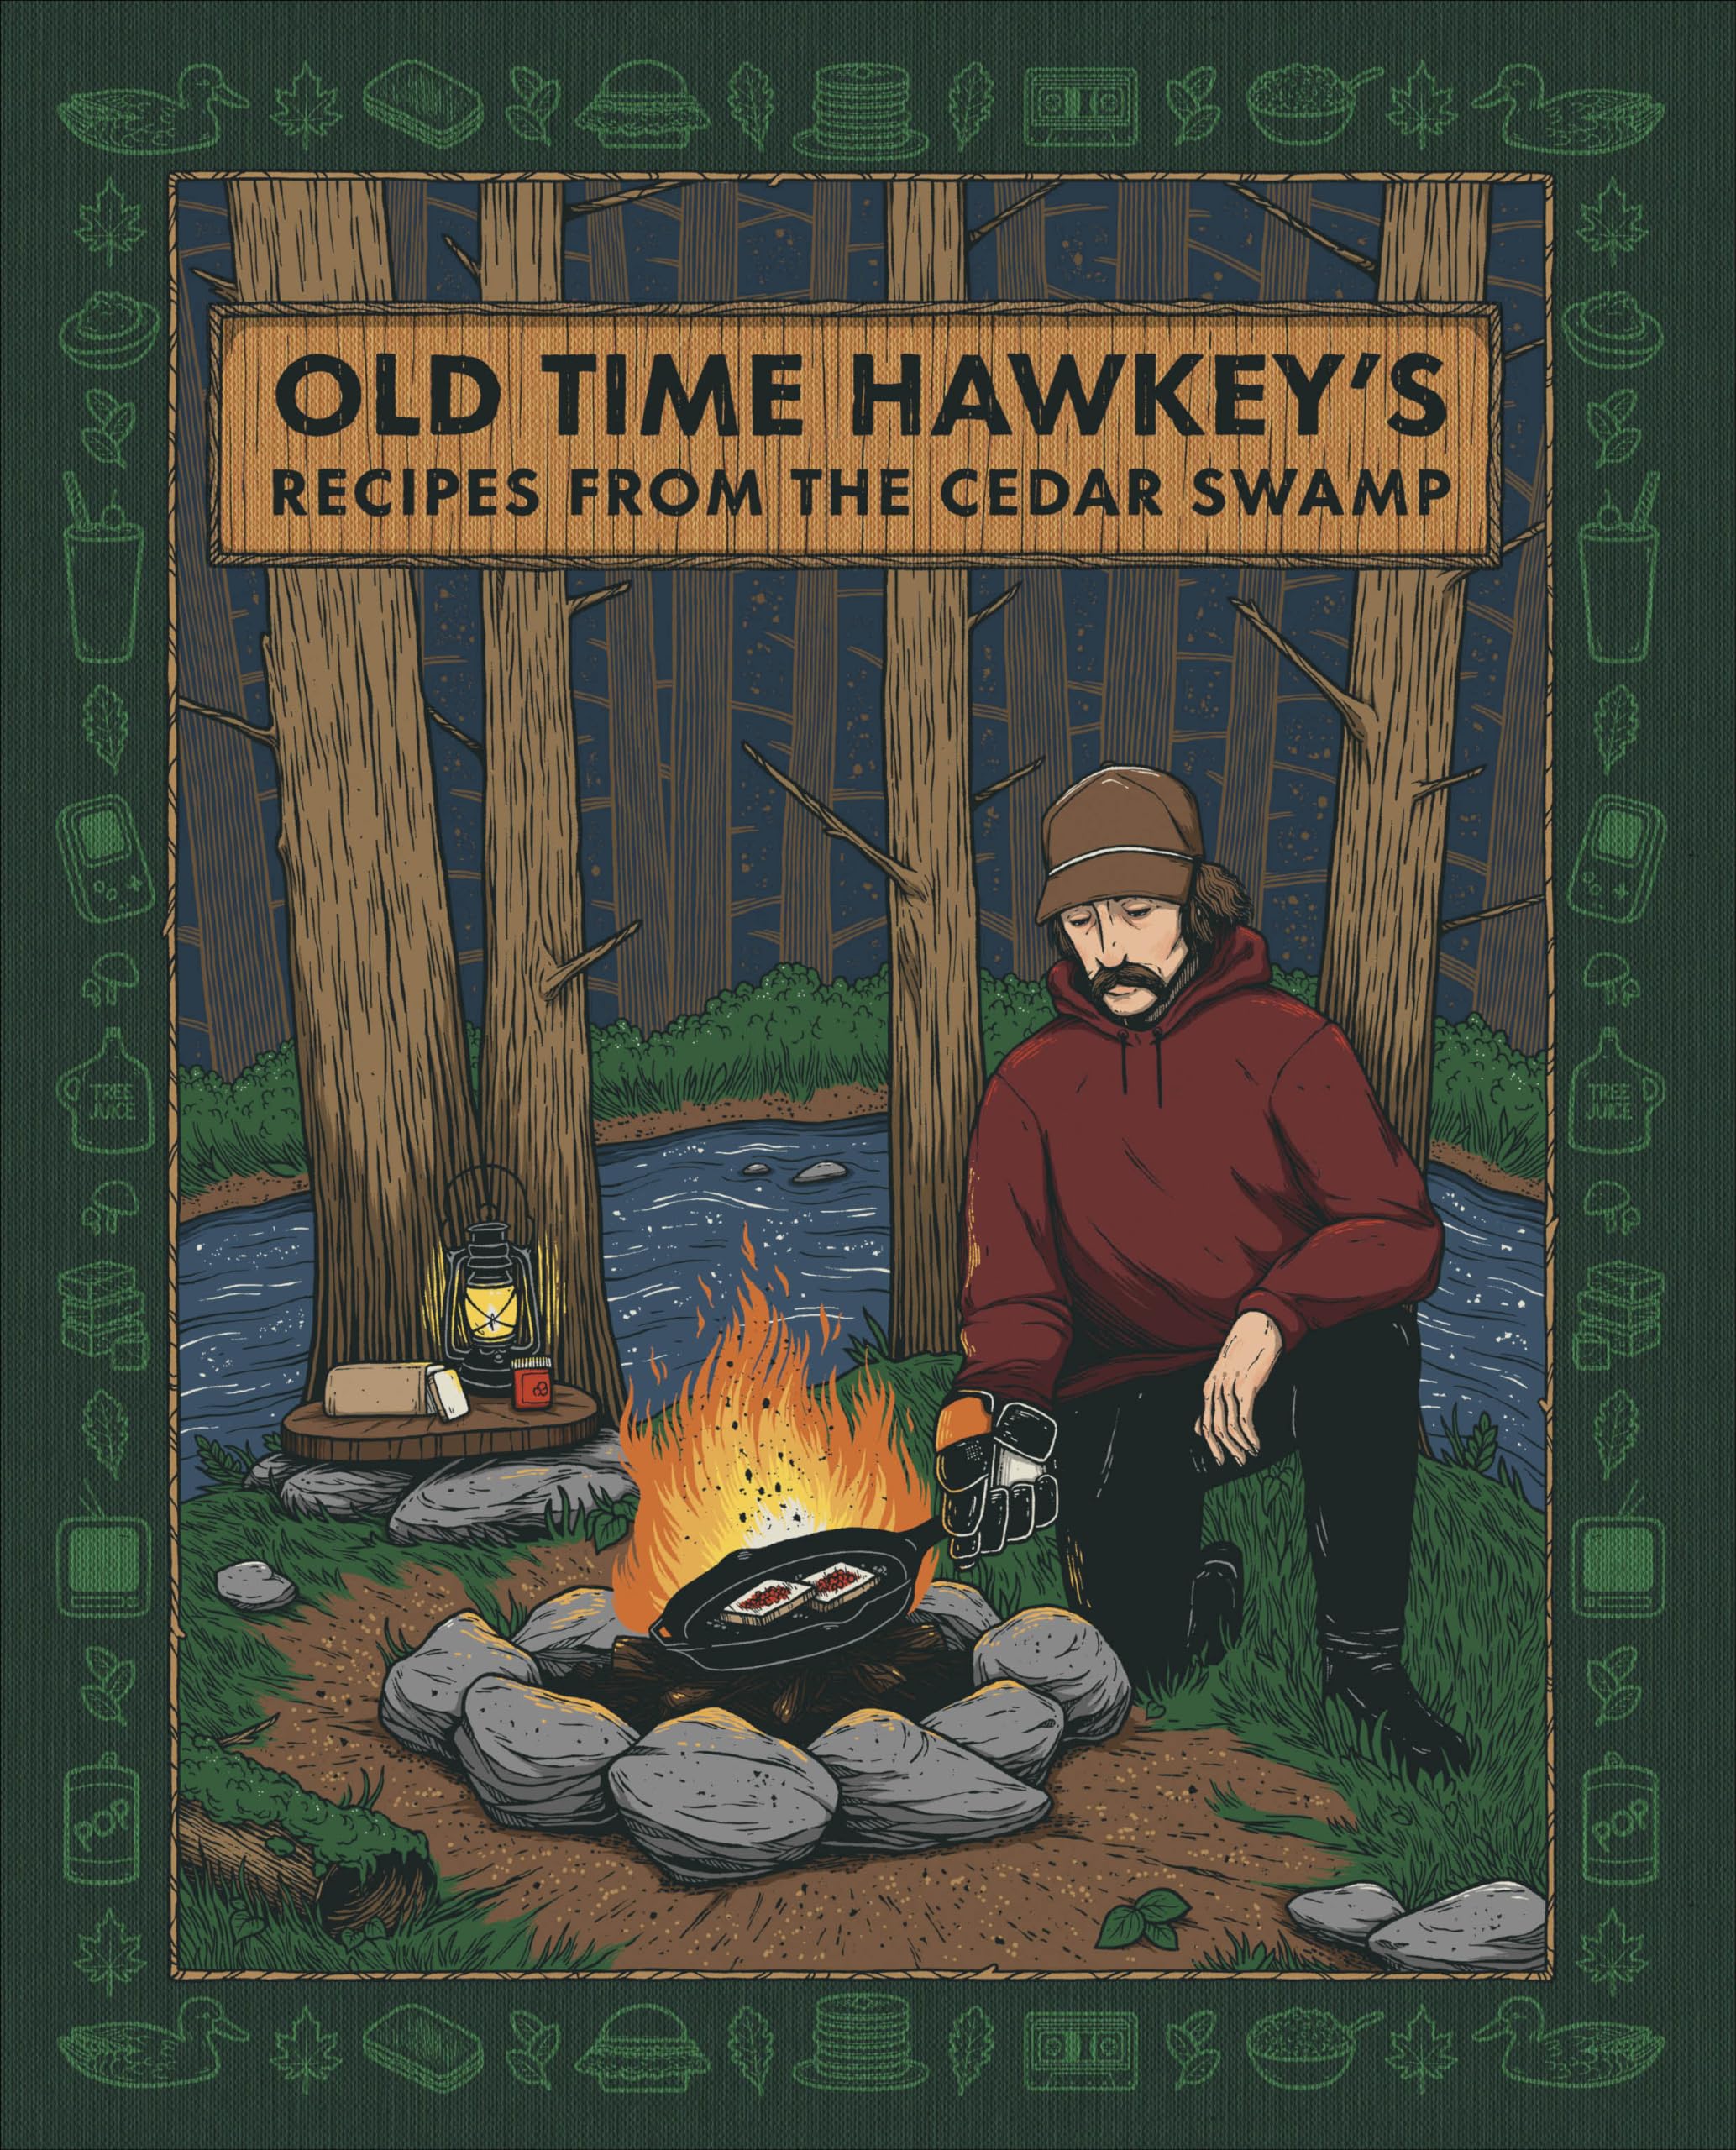 Old Time Hawkey's Recipes from the Cedar Swamp: A Cookbook by Old Time Hawkey